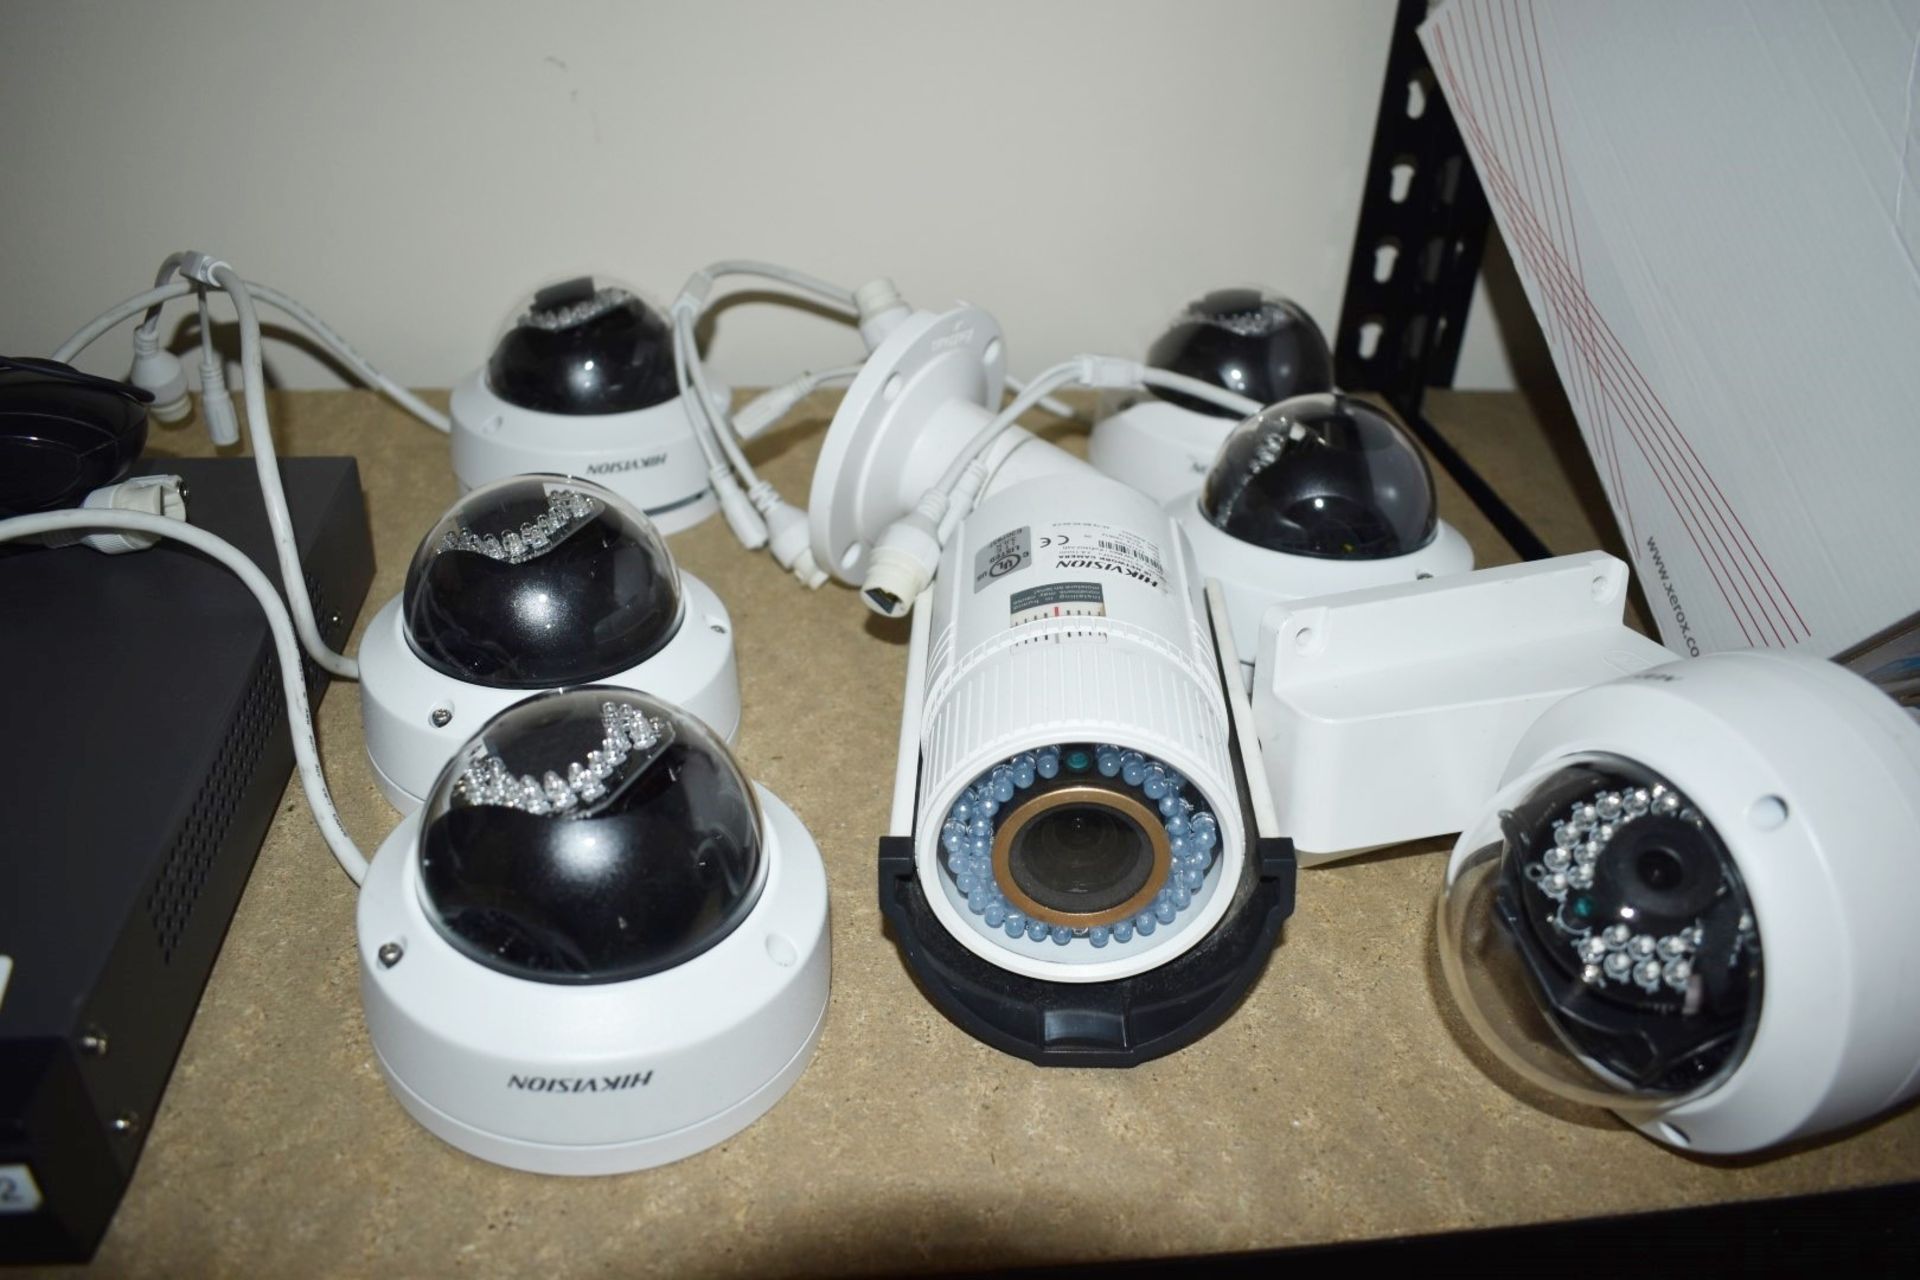 1 x Hikvision Digital CCTV 8 Channel Video Recorder With 7 x Infra Red Network Cameras - Image 4 of 9